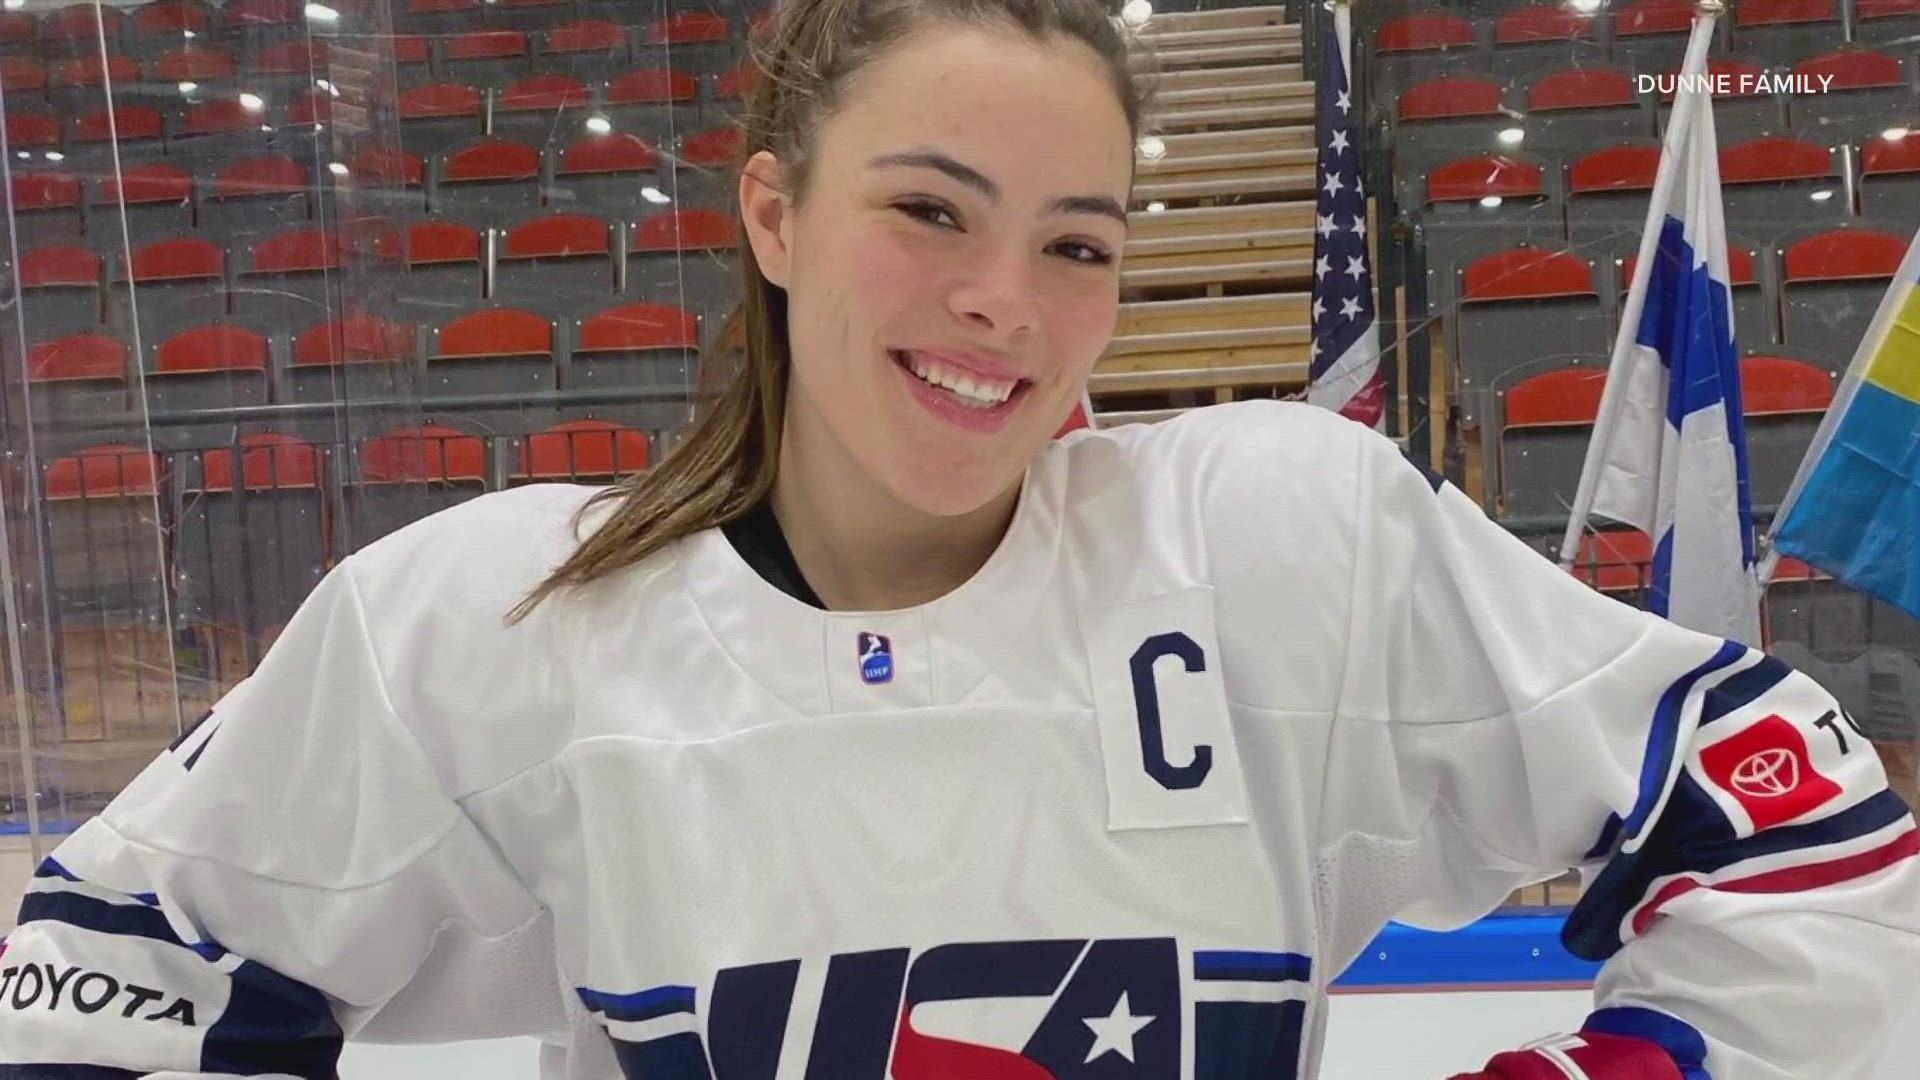 Joy Dunne is the youngest of the hockey dynasty family. She recently captained the USA women's U18 team to a bronze medal at the World Championships.